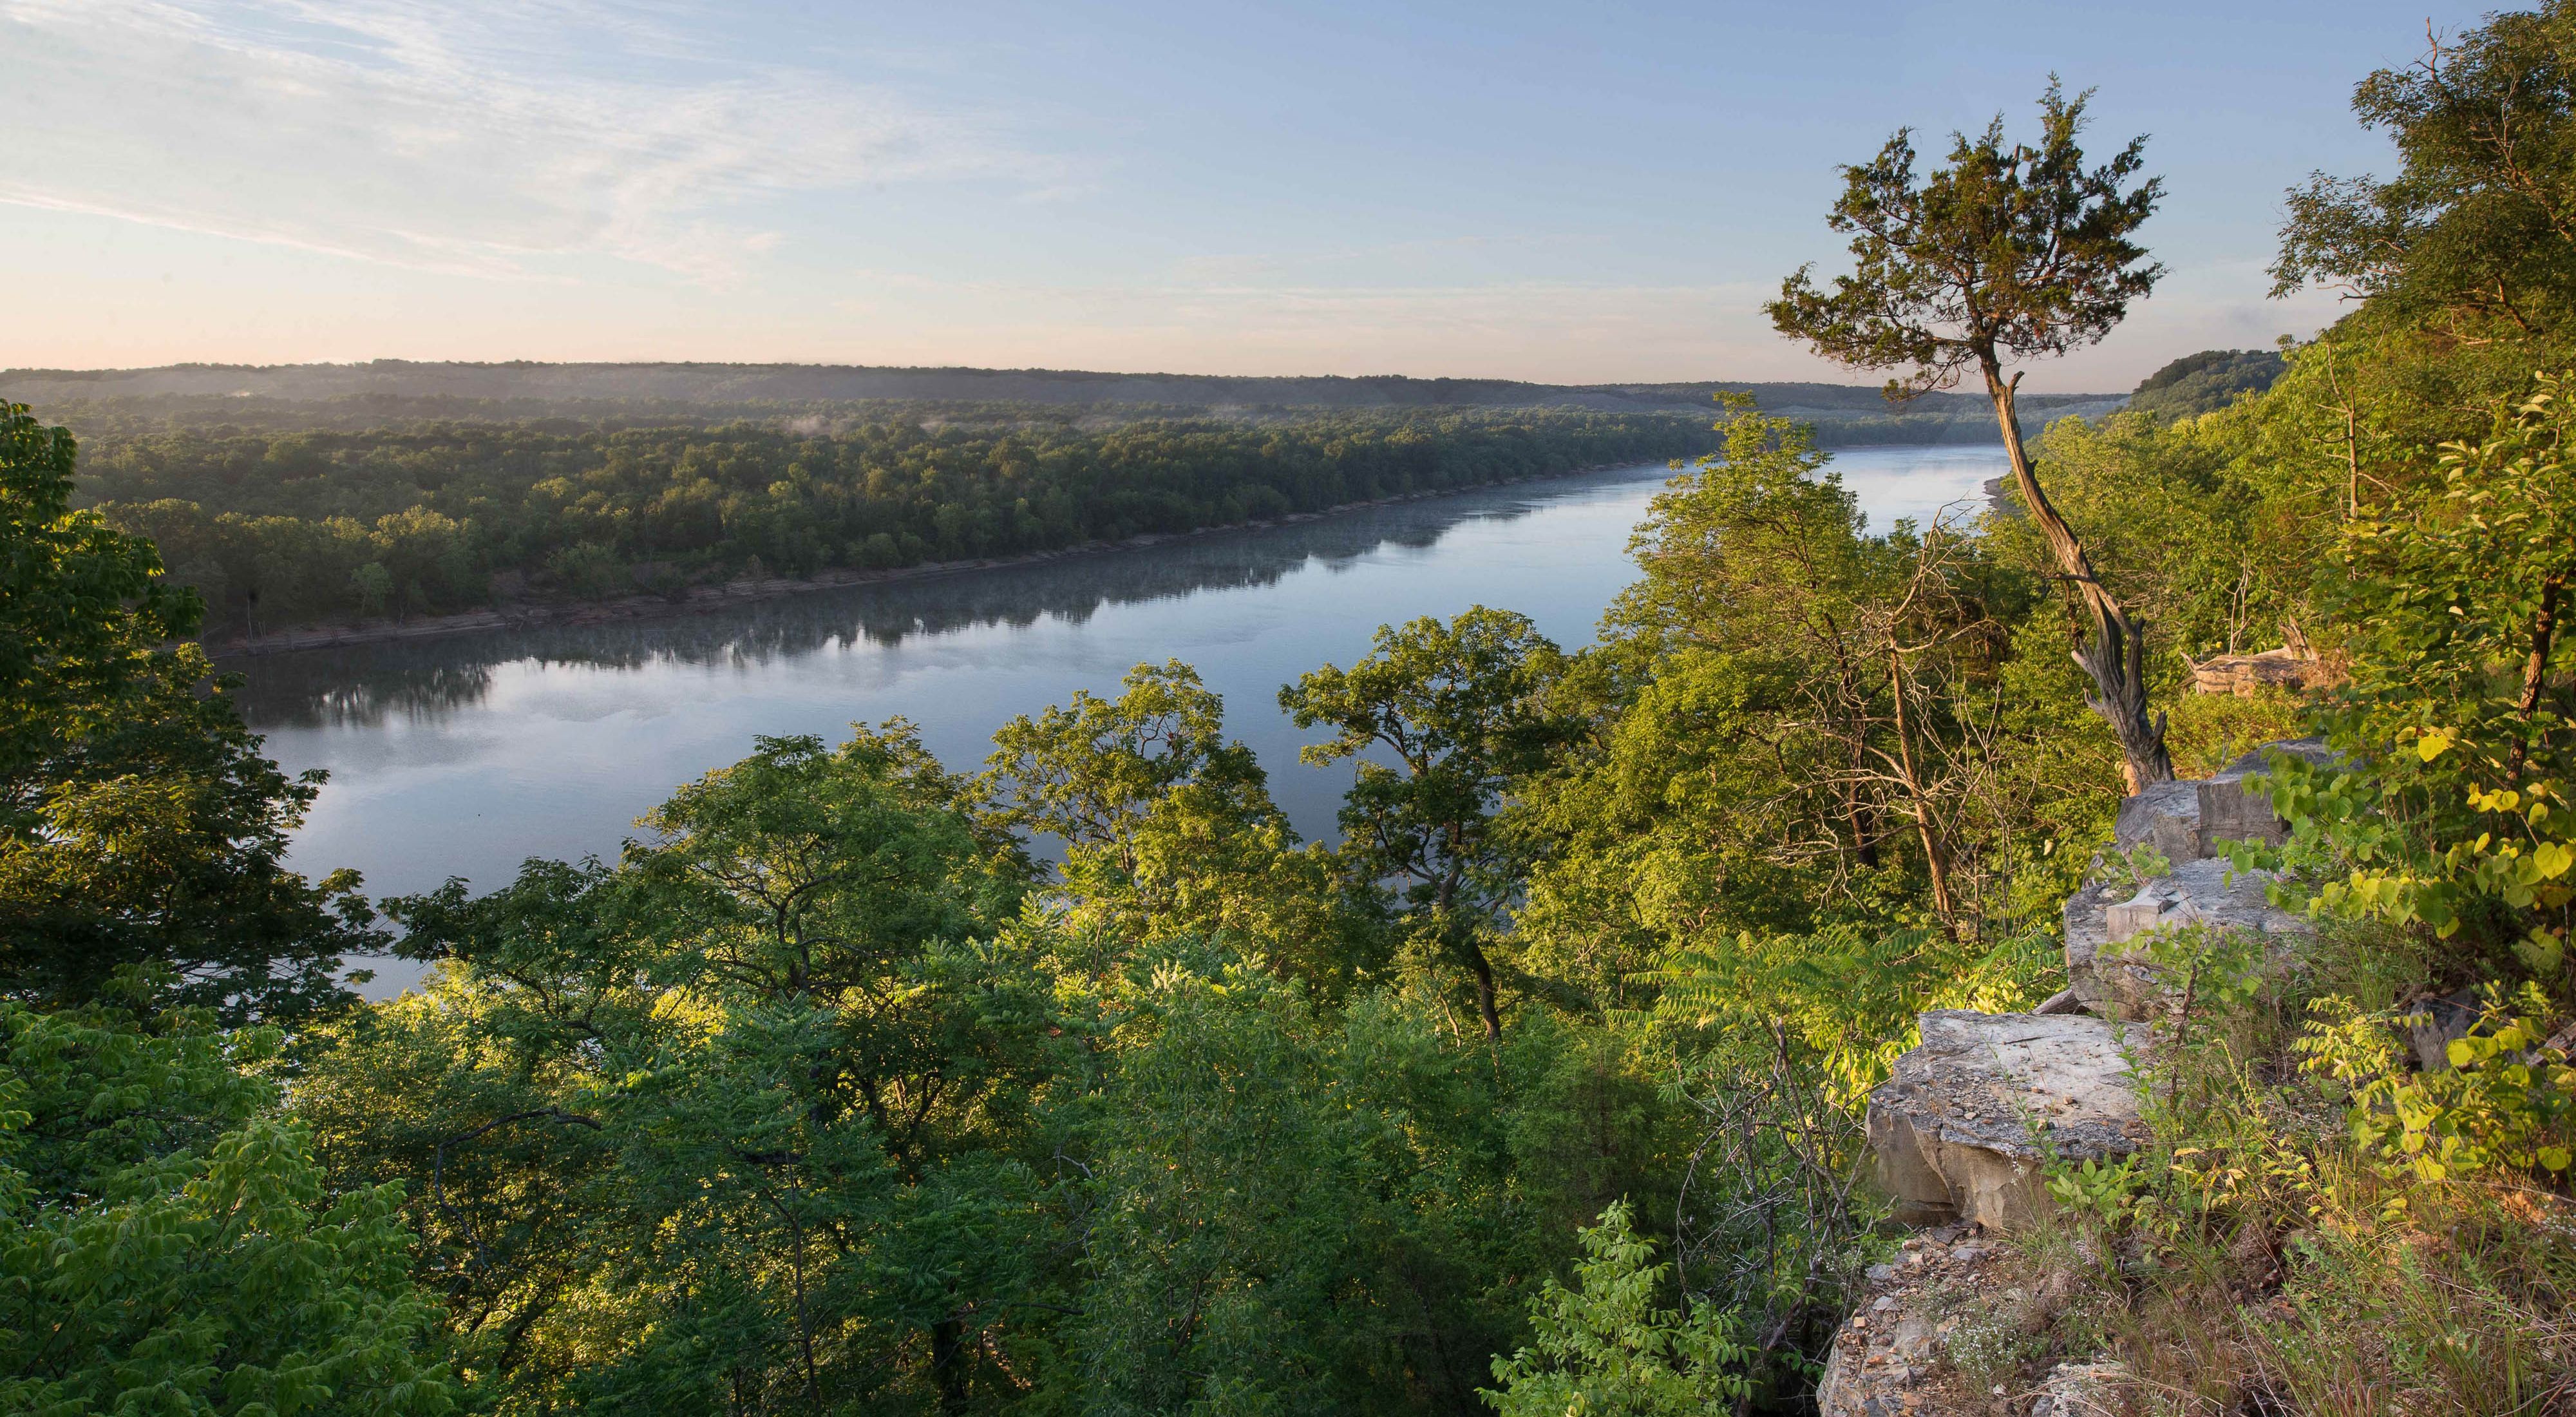 The Ohio River atop one of the bluffs at Wallier Woods in Harrison County, Indiana.